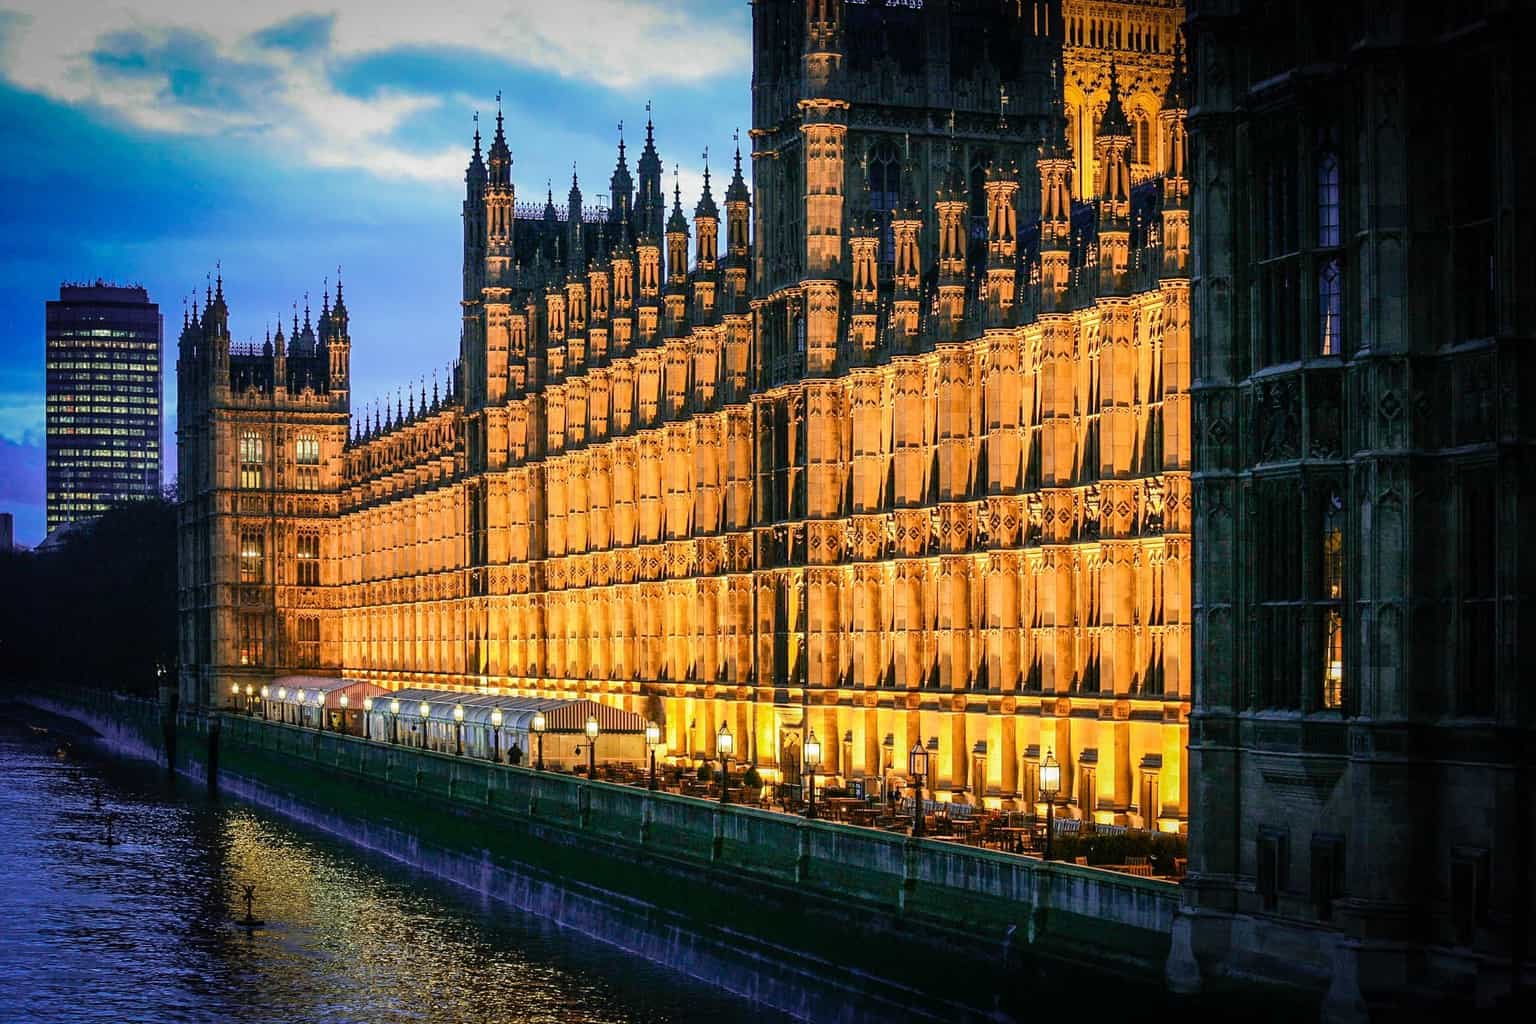  Houses of Parliament, The Palace of Westminster, London 